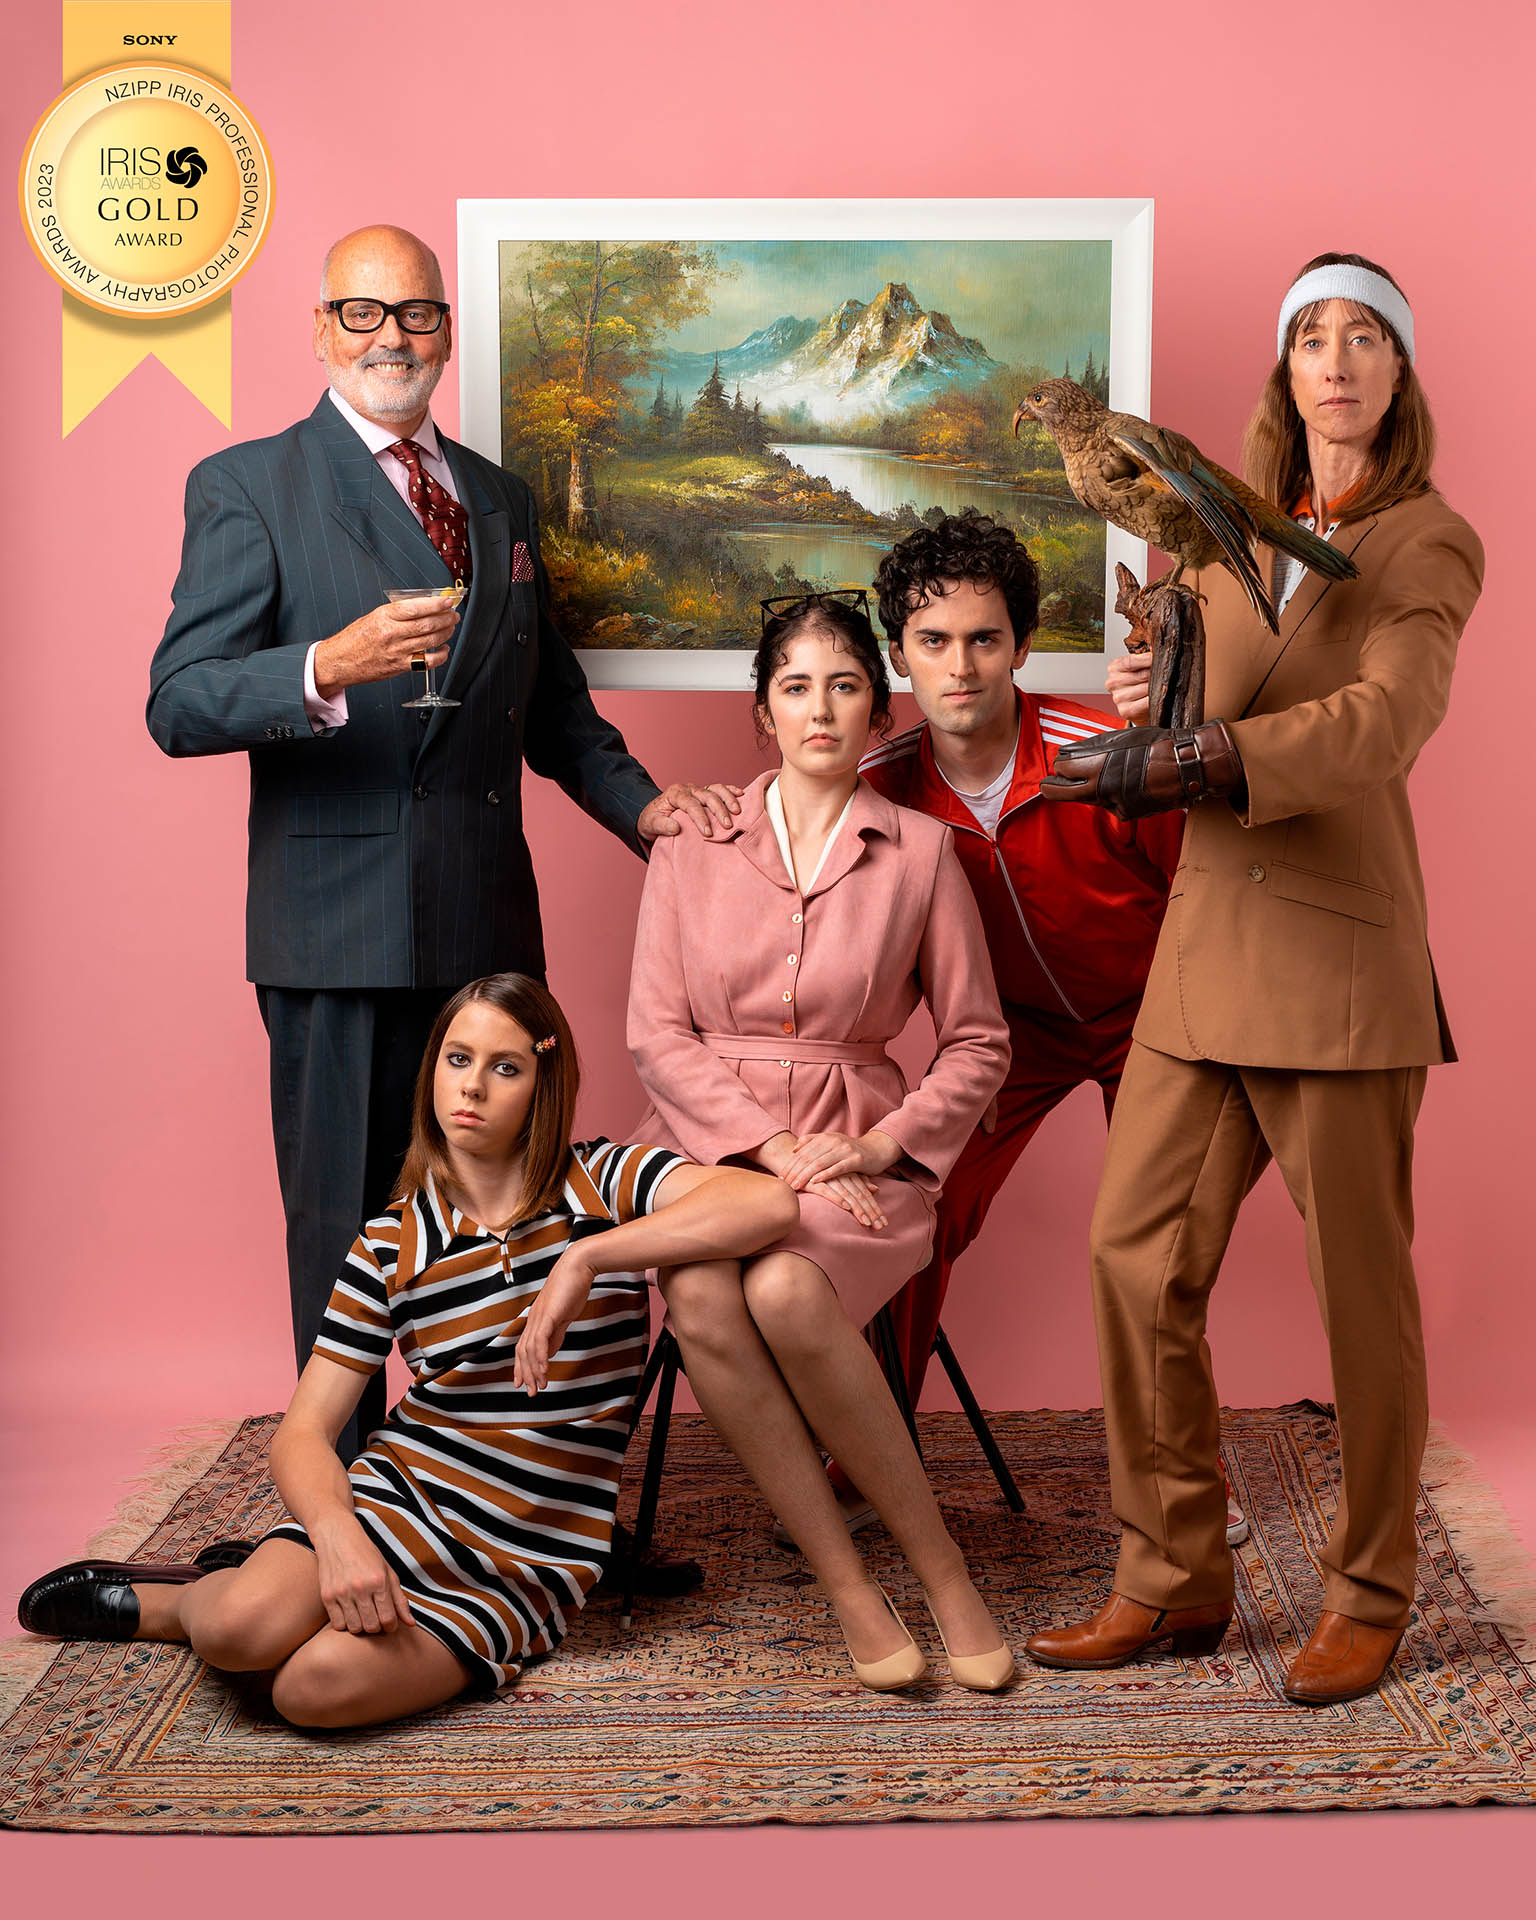 A five person family portrait, with everyone in costume. There is a pink backdrop and the photo has a gold award.